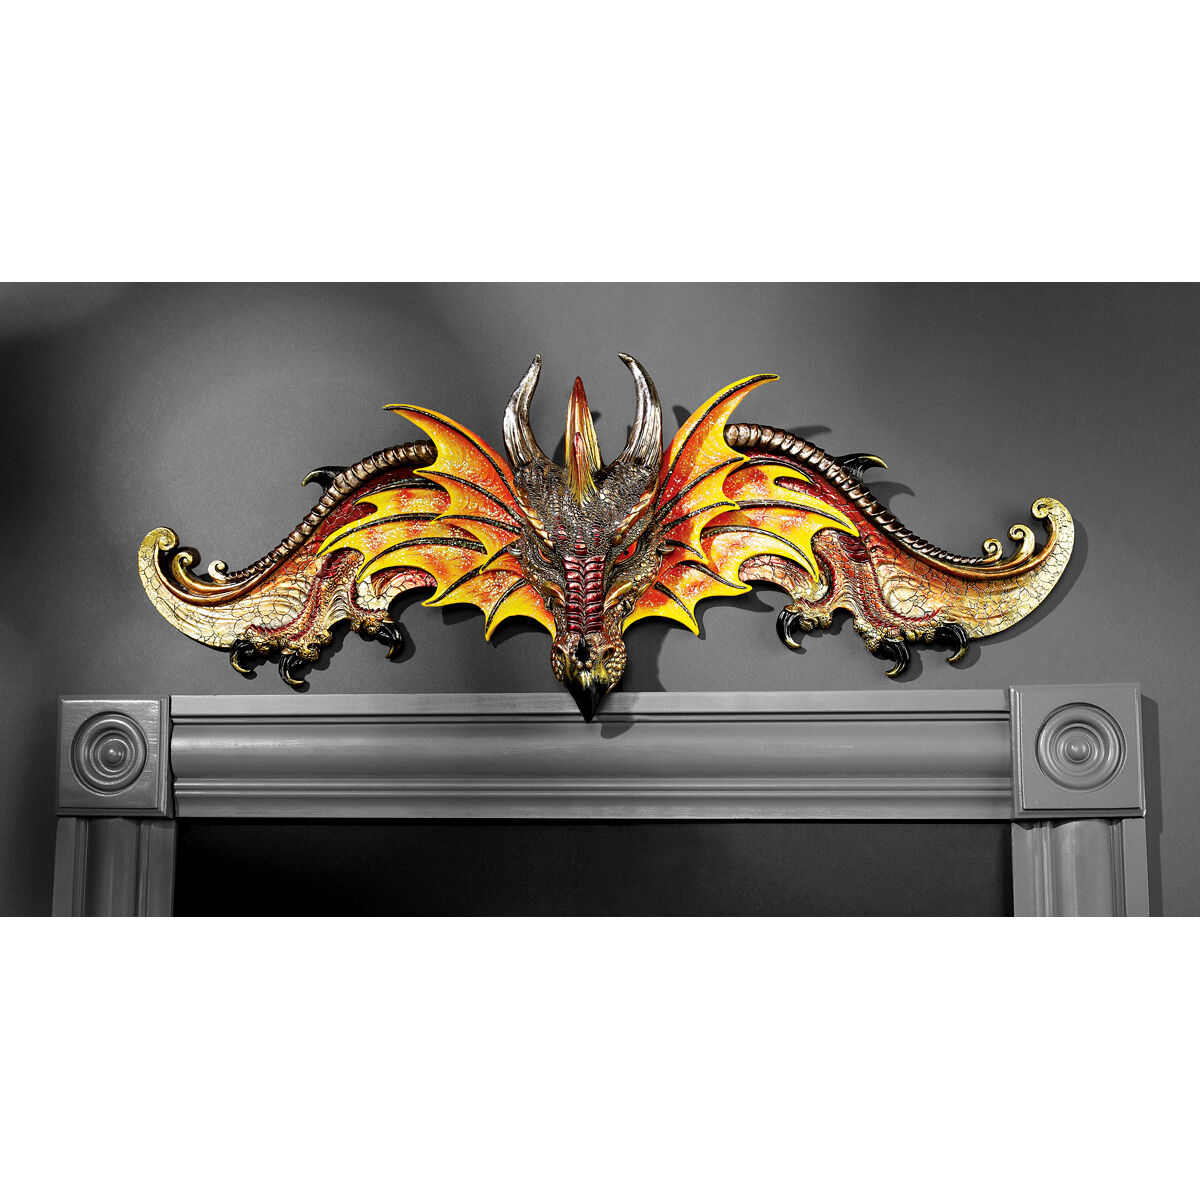 Medieval Dragon Arched Wings & Pointed Talons Sculptural Bright Color Pediment